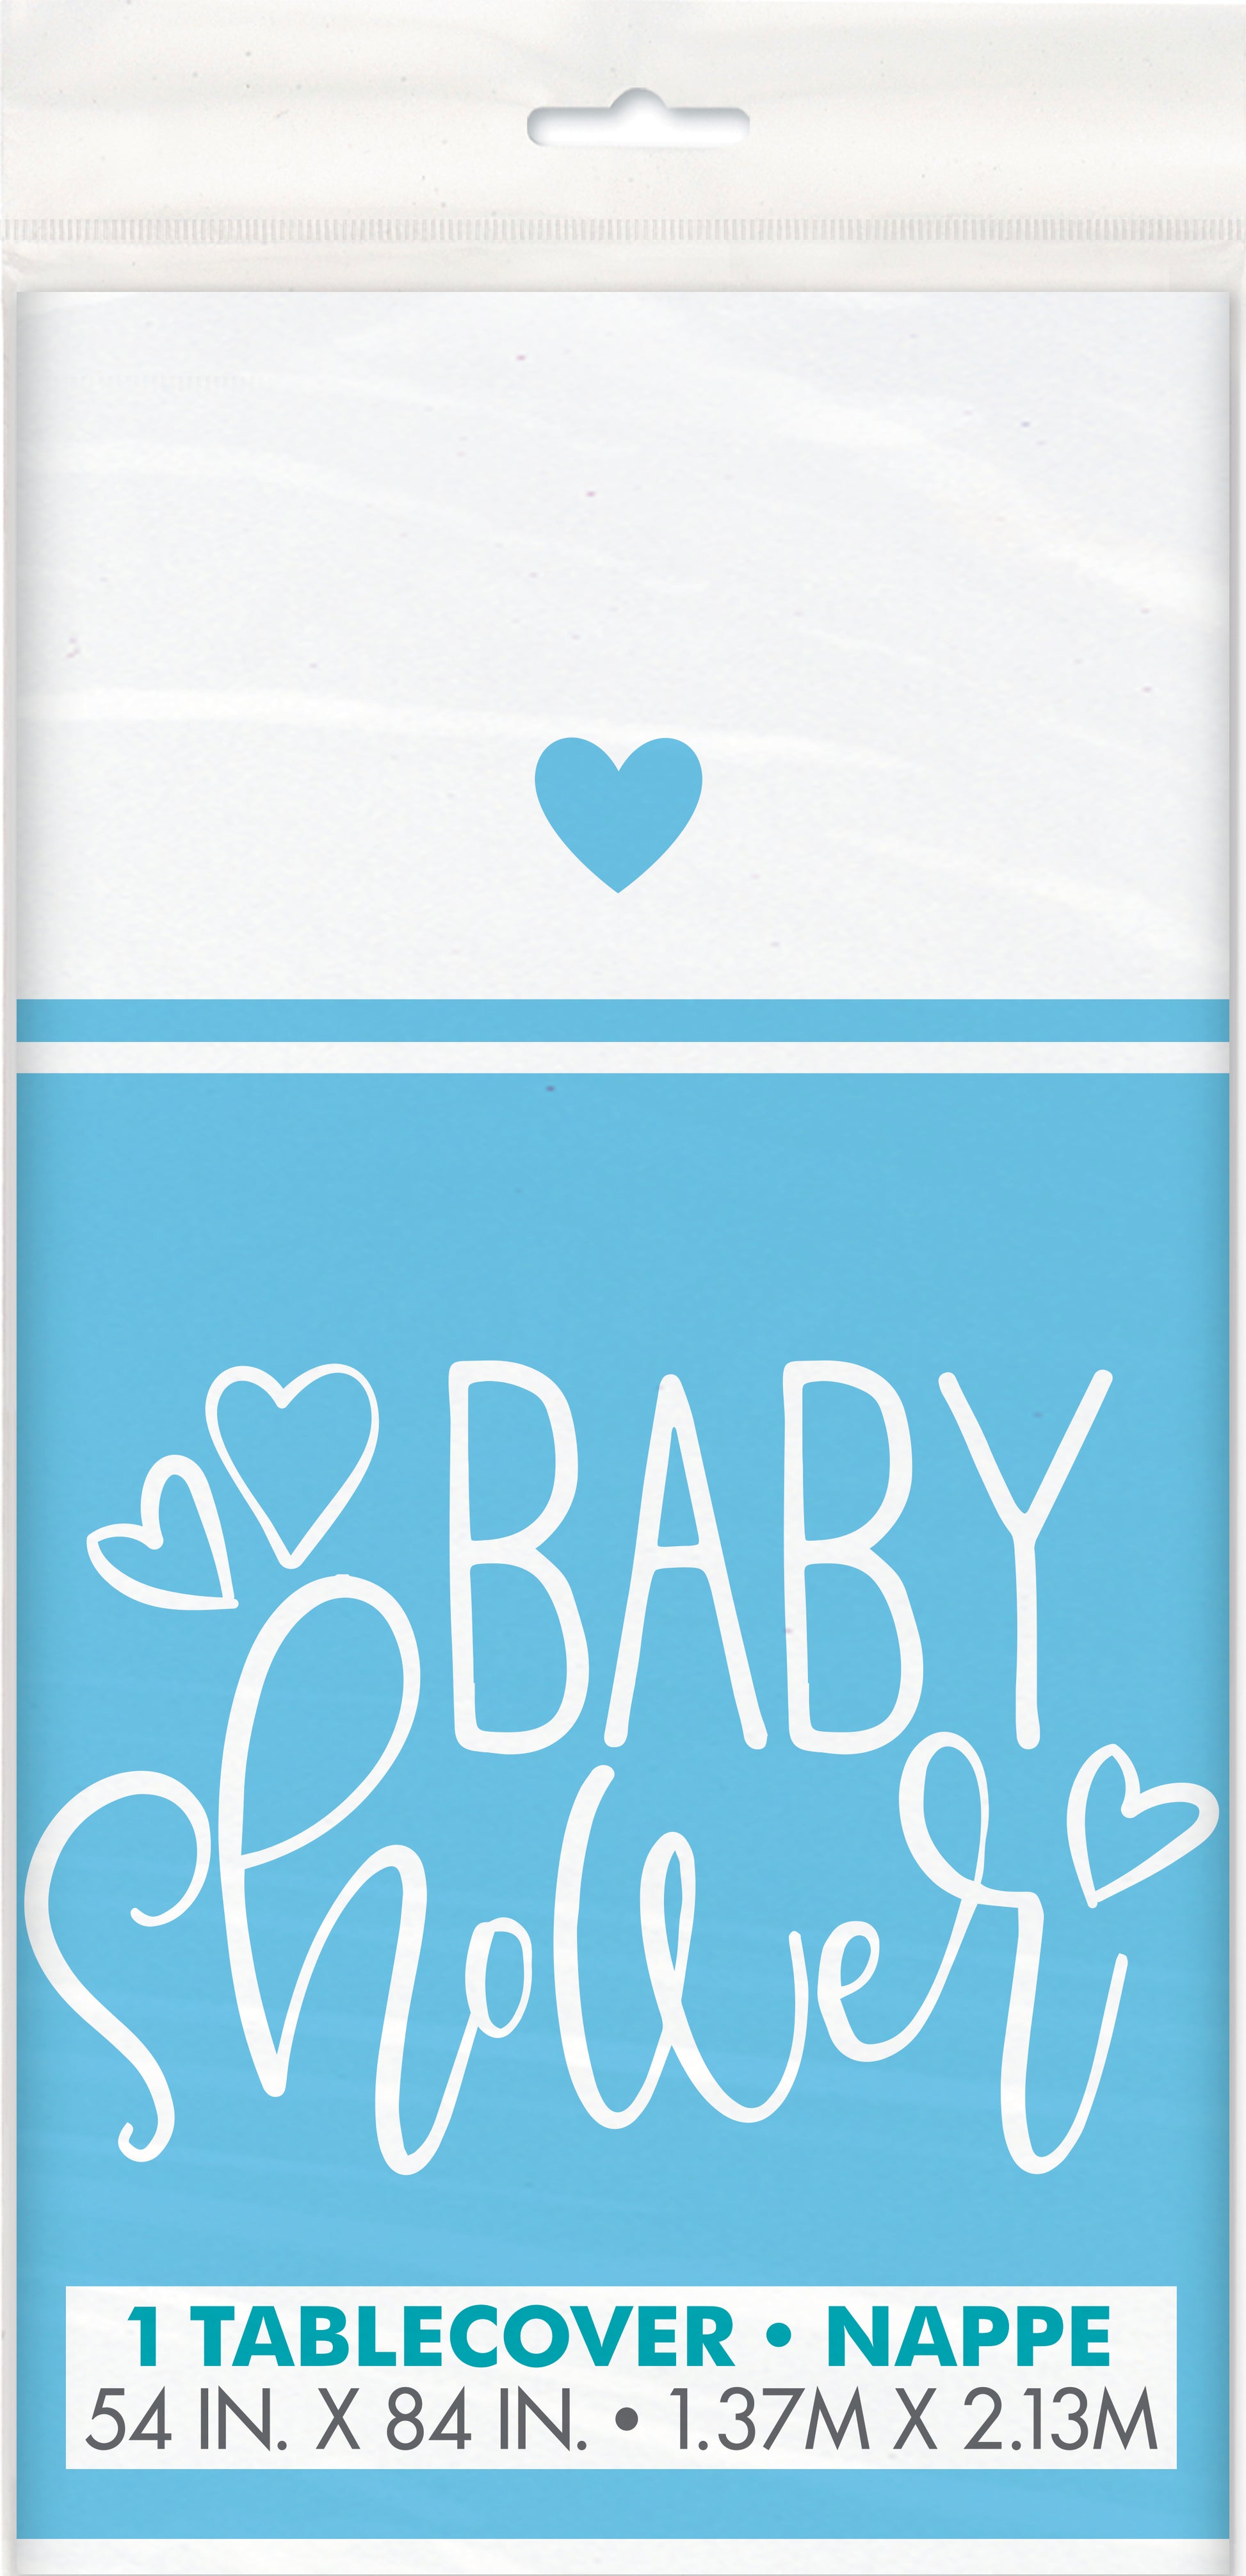 Blue Hearts Tablecover - Uk Baby Shower Co ltd